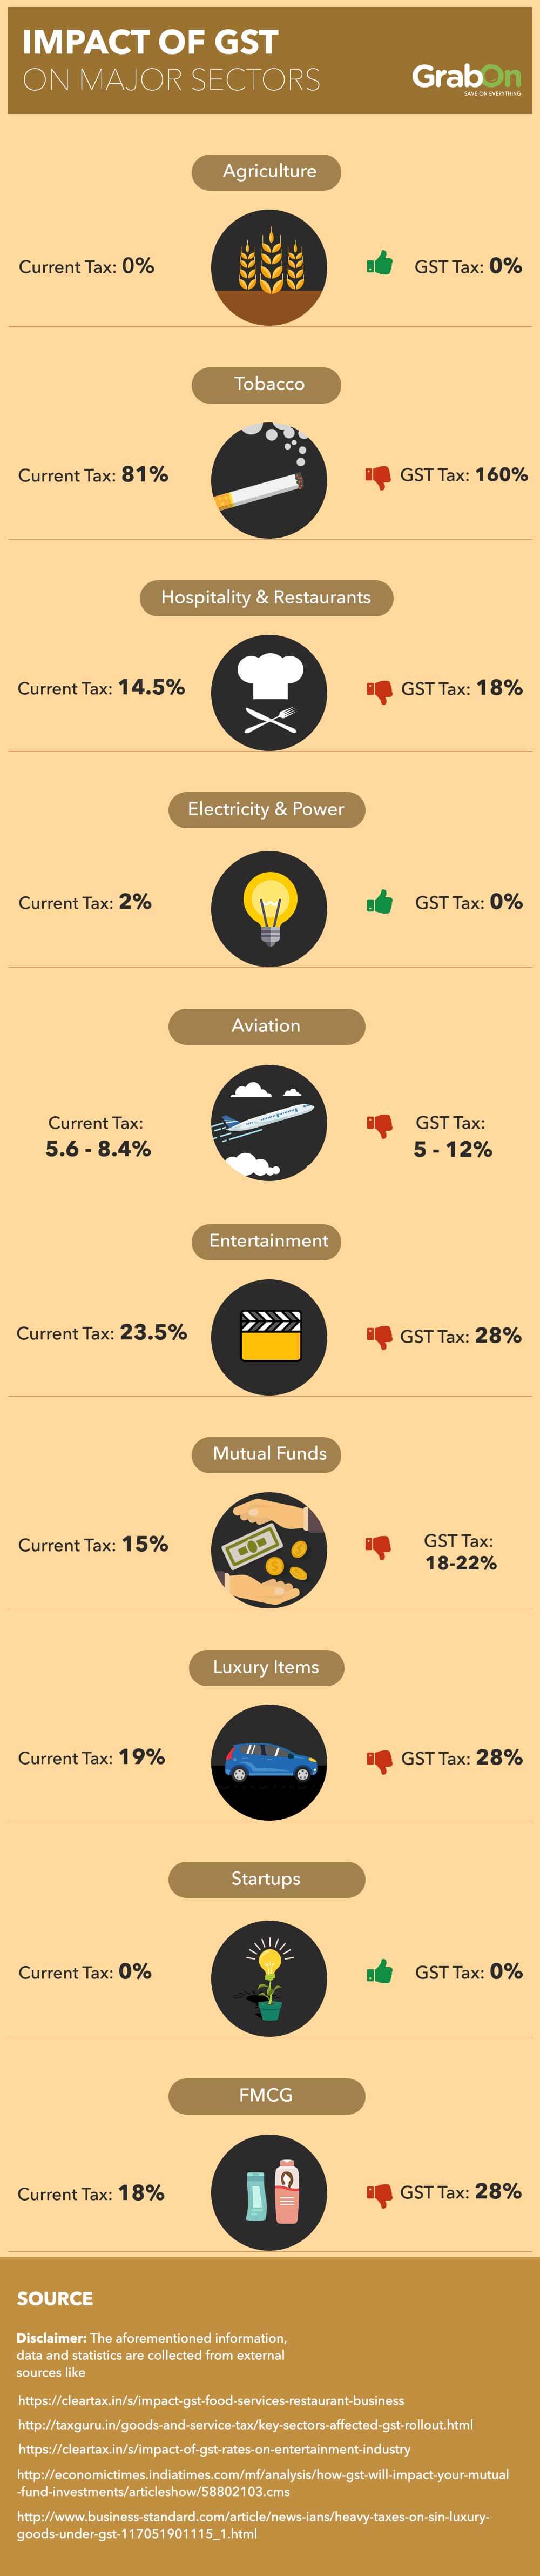 Impact of Gst on Major Sectors